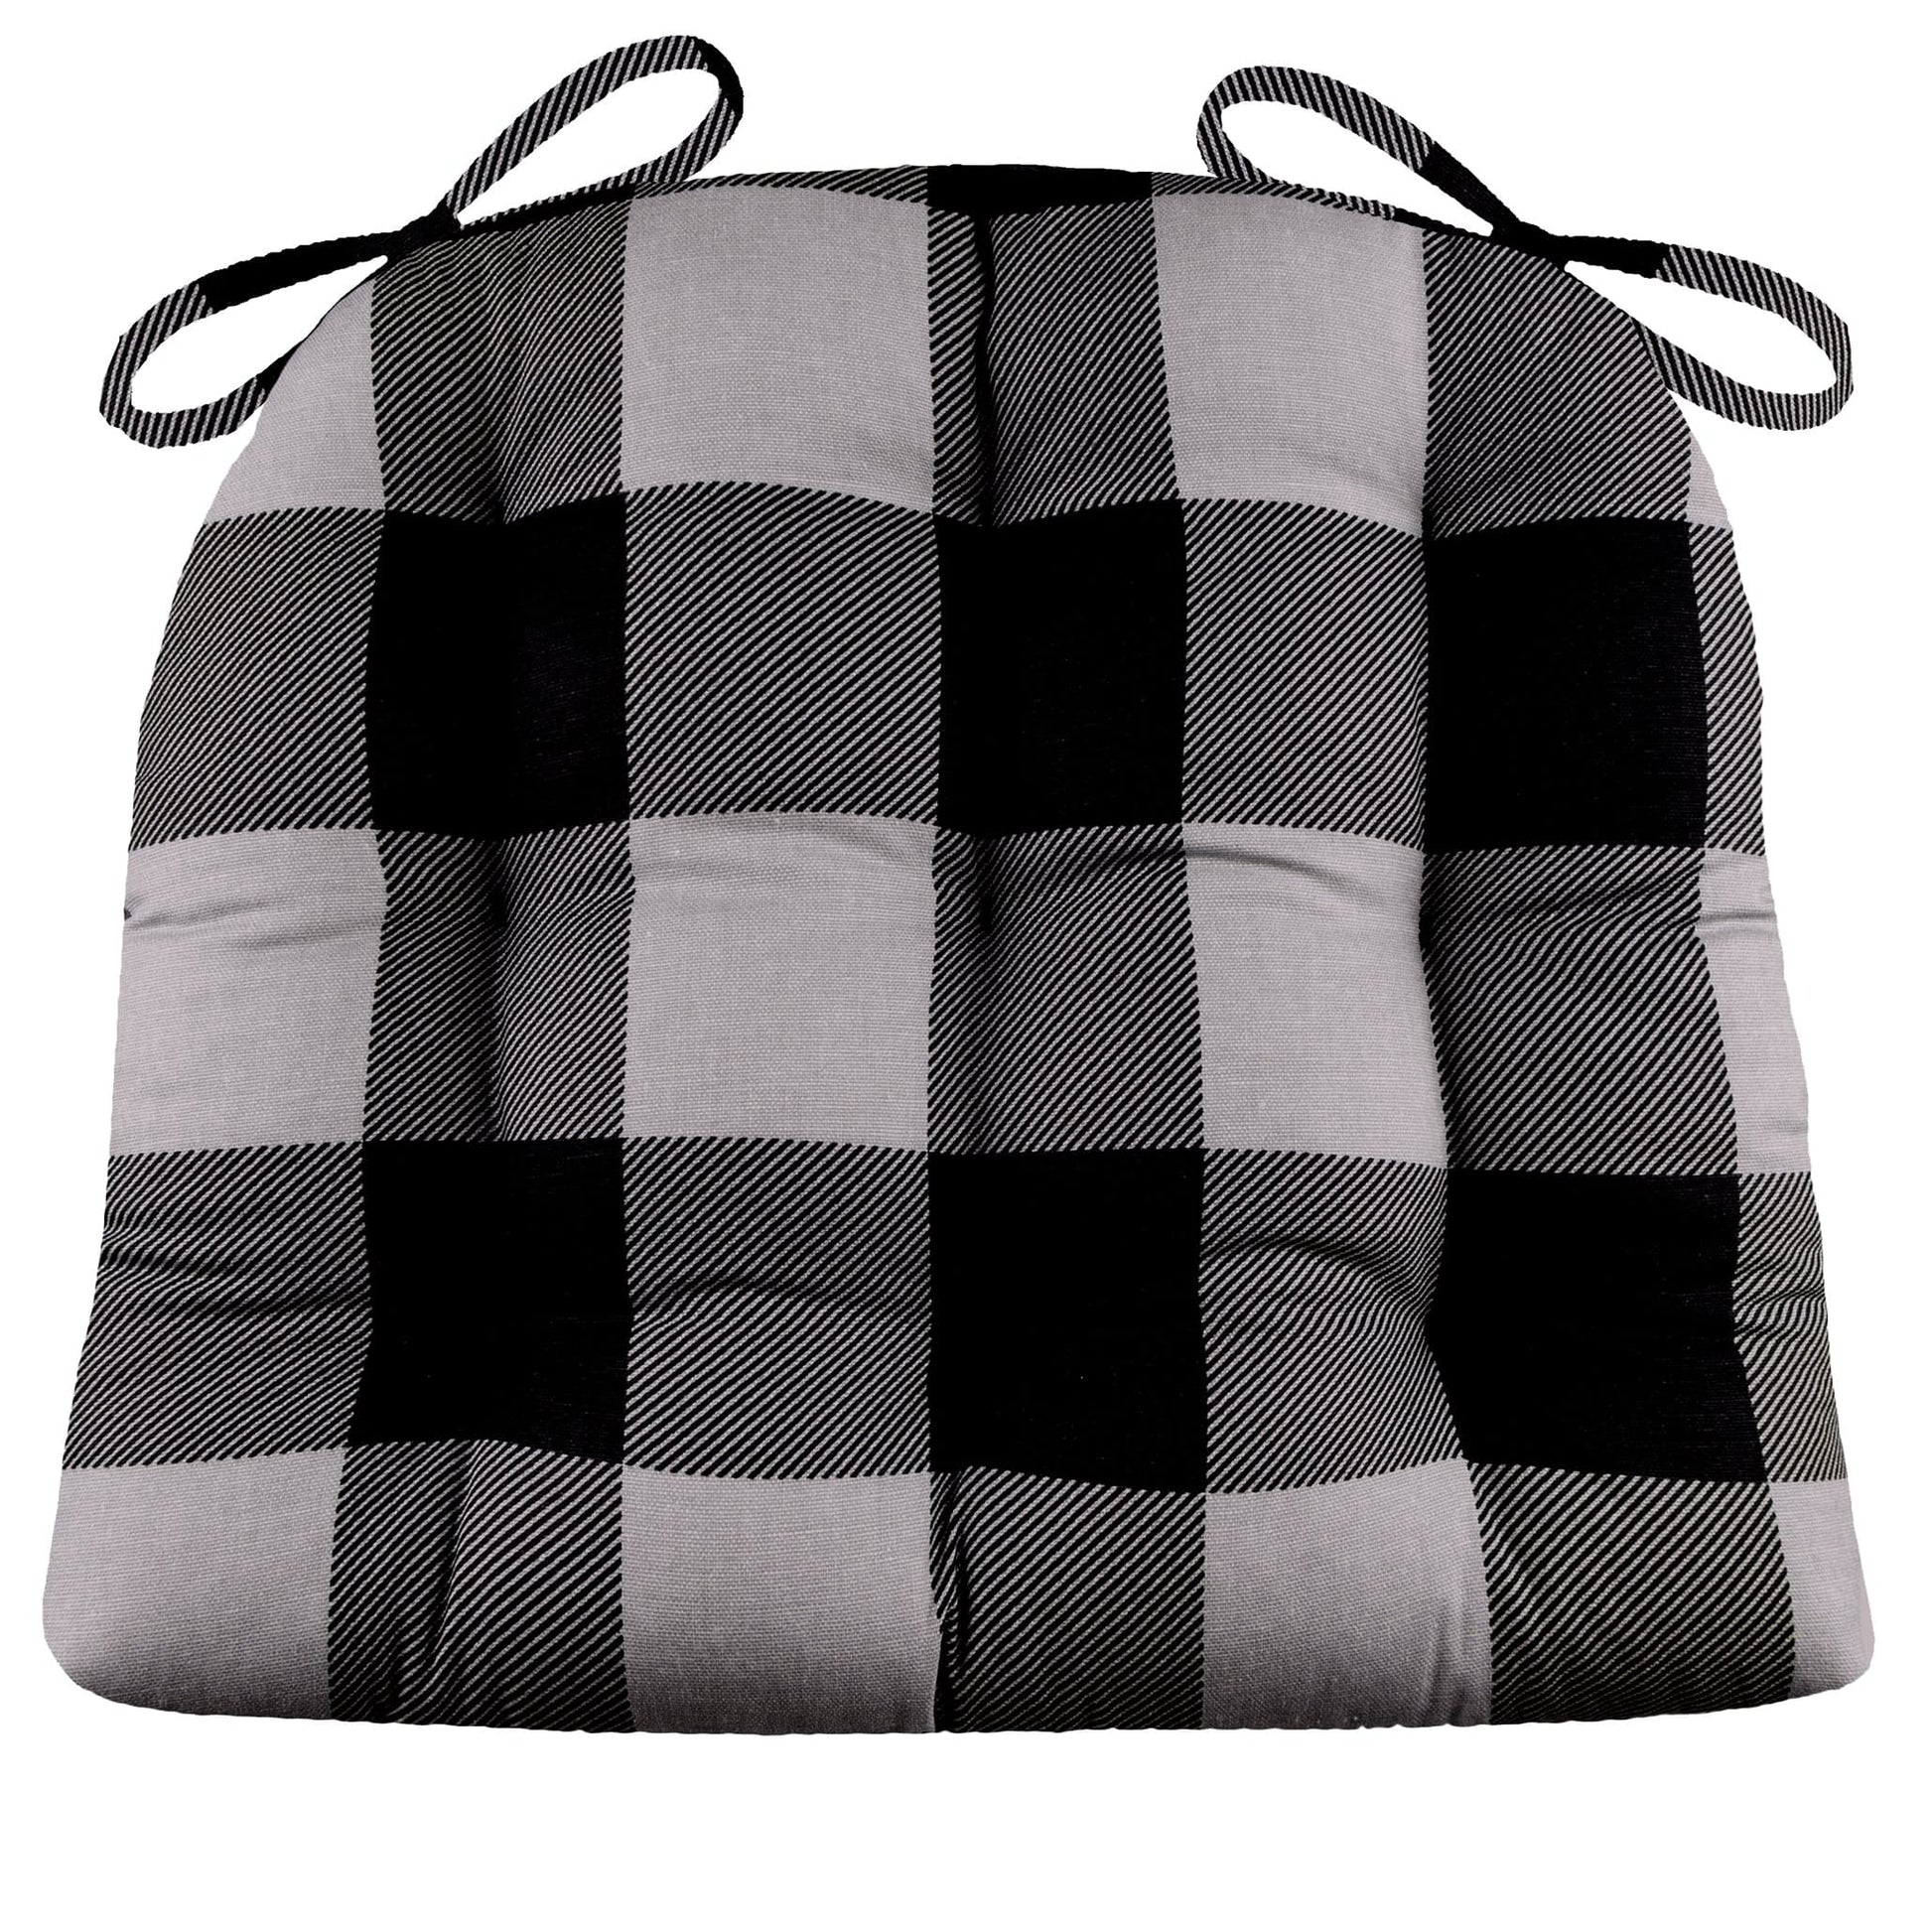 Black Buffalo Check Outdoor Chair Pads, Set of 2